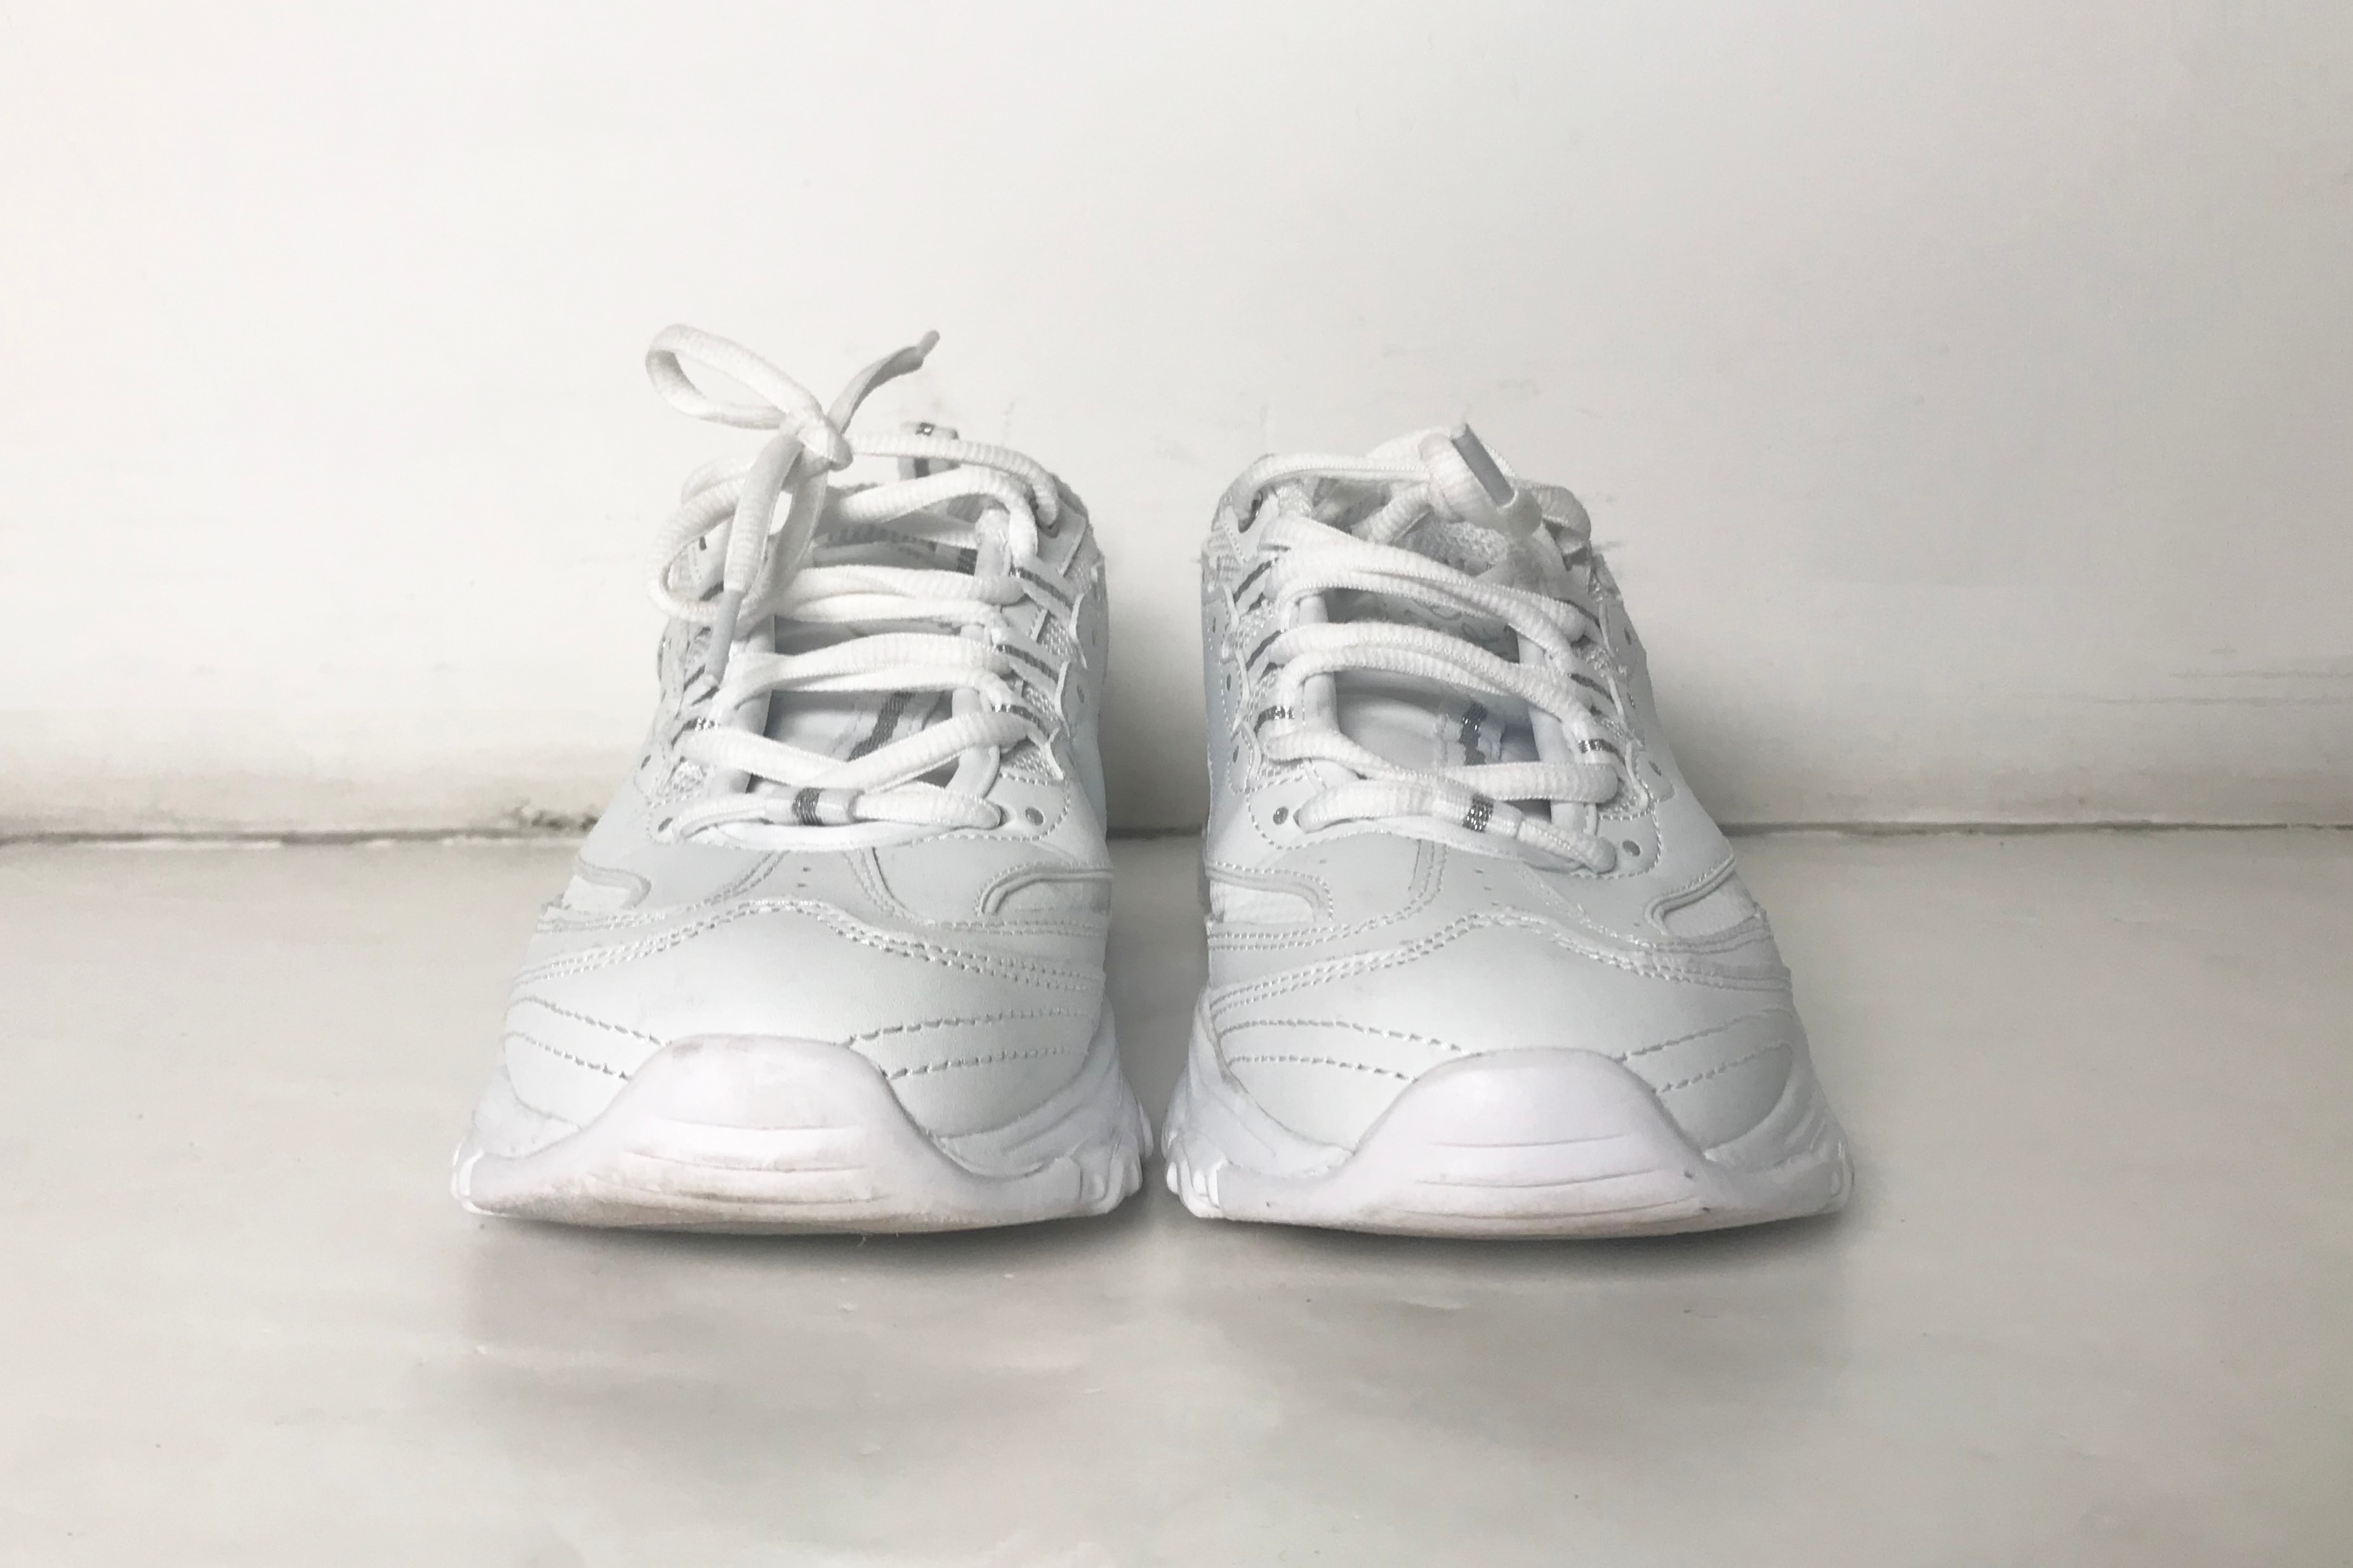 Review of the Skechers D'Lites Sneakers in White Dad Shoe Chunky Sneaker Trend